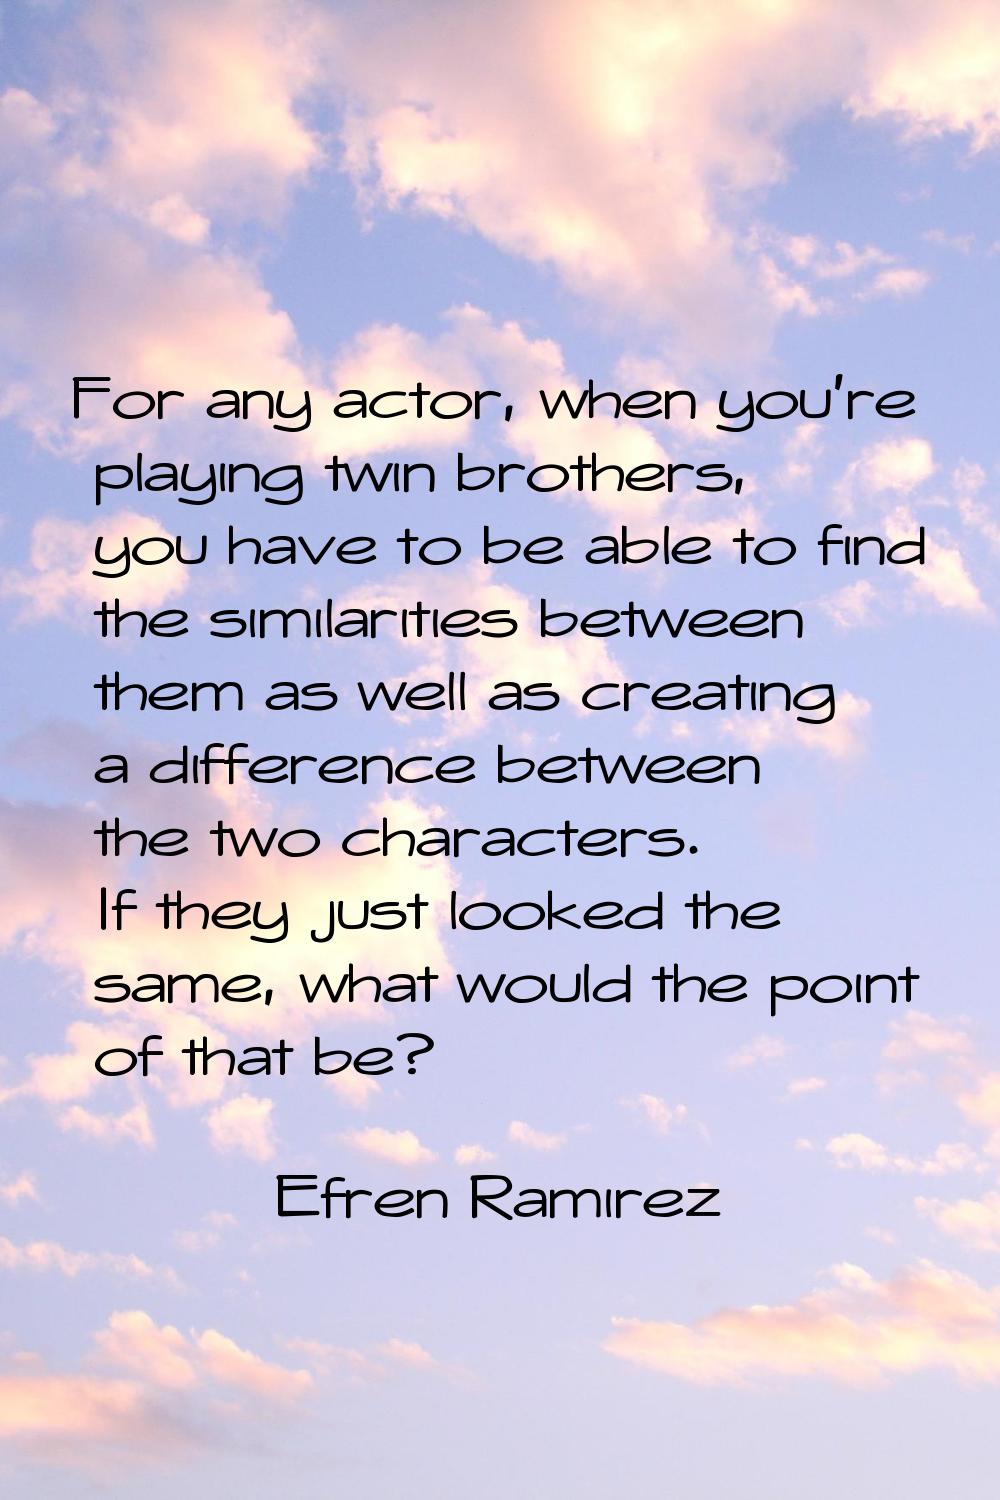 For any actor, when you're playing twin brothers, you have to be able to find the similarities betw